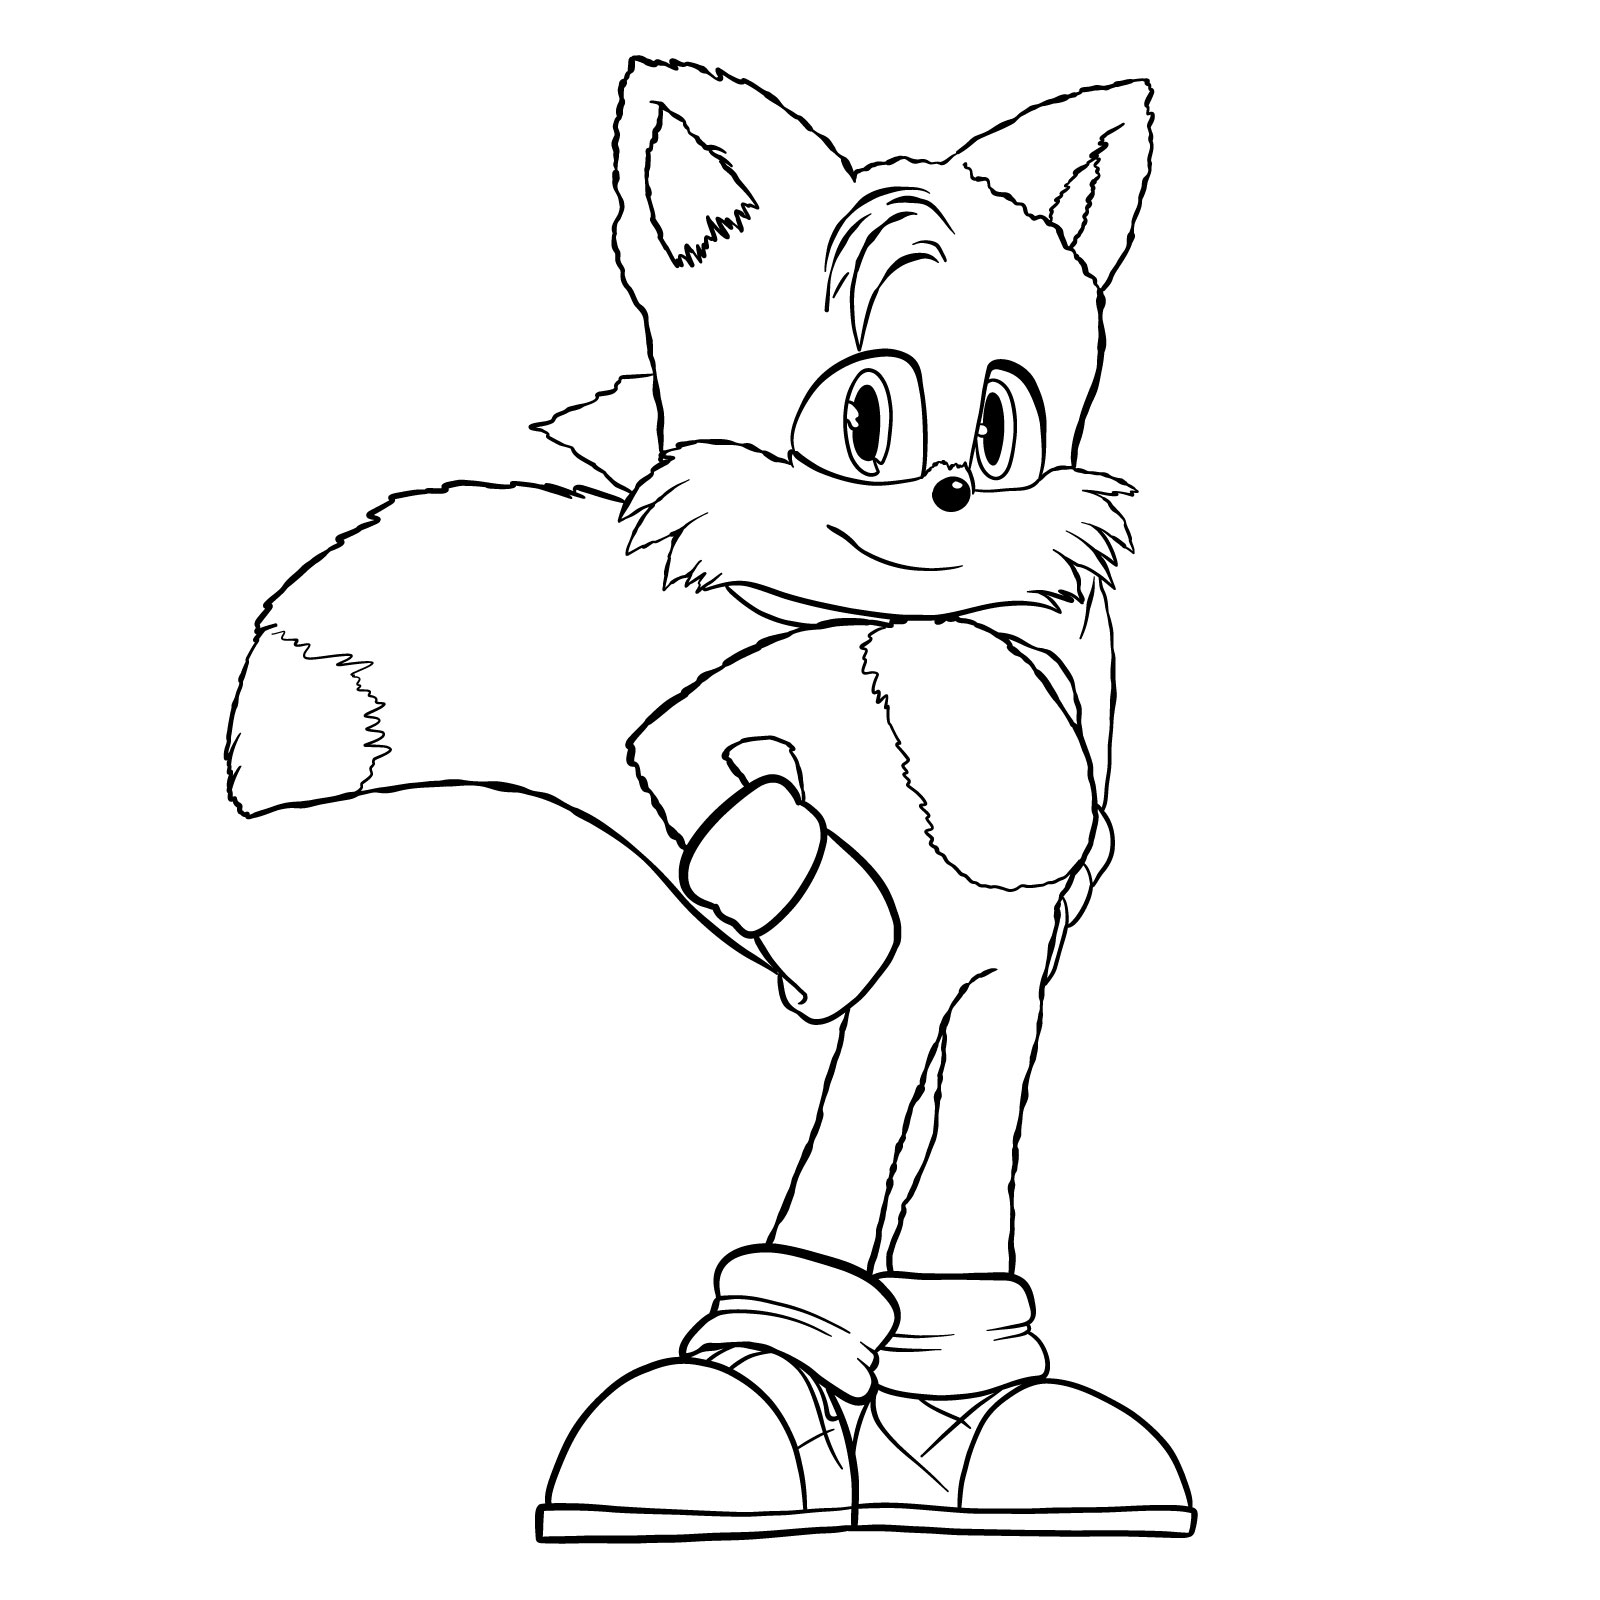 How to draw Tails (movie version) - final step